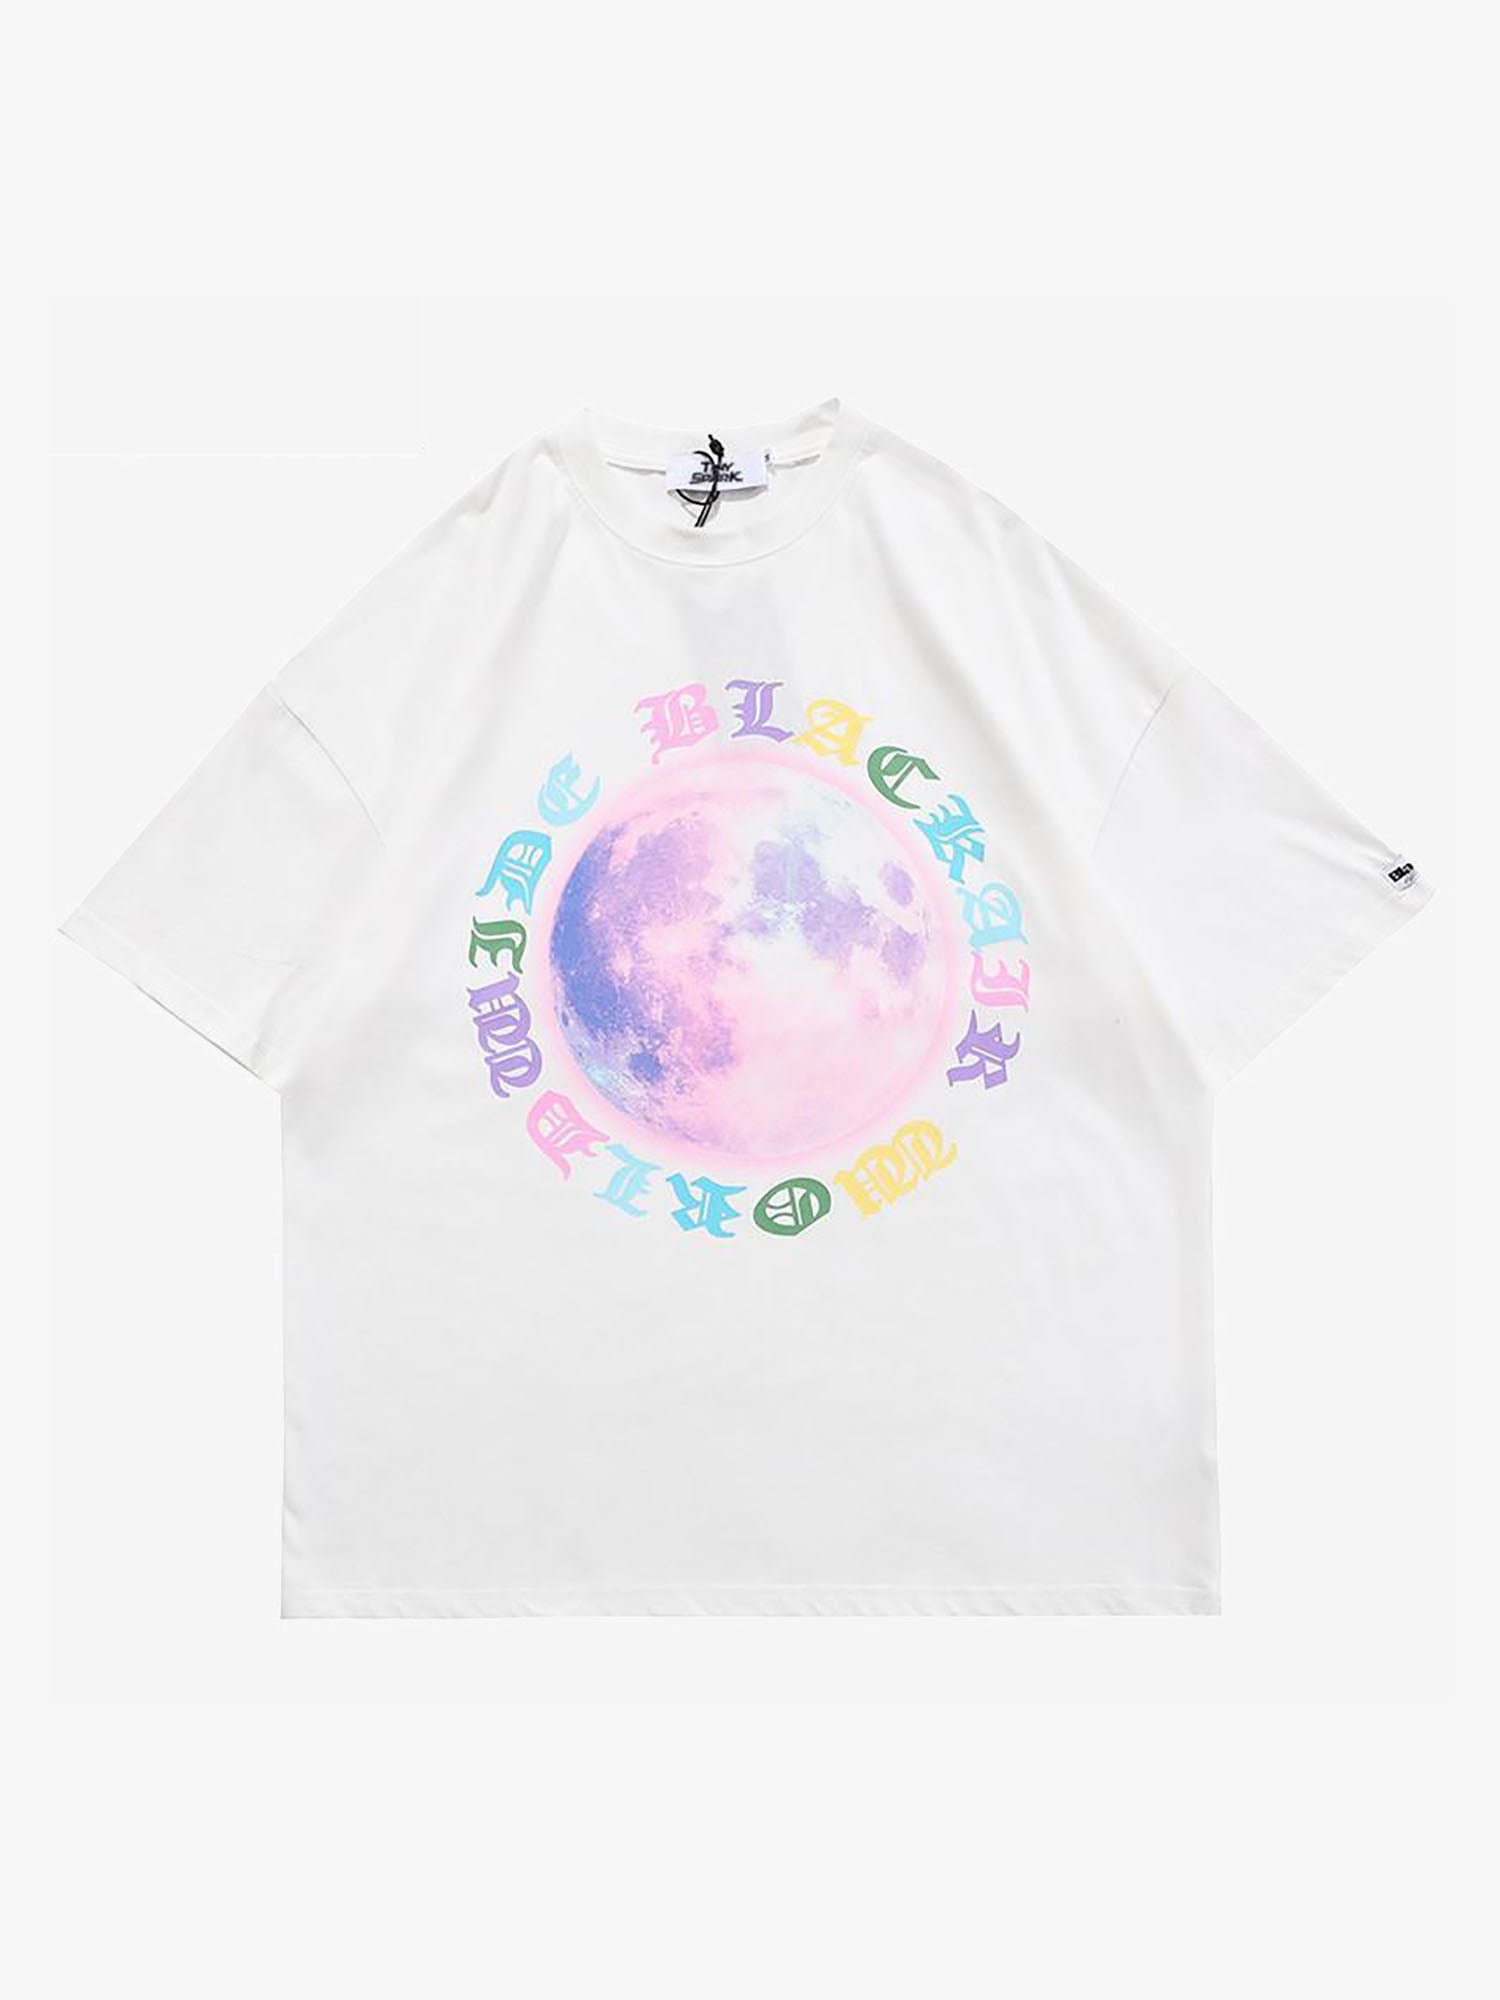 JUSTNOTAG Letters Around Colored Earth Print Short Sleeve Tee